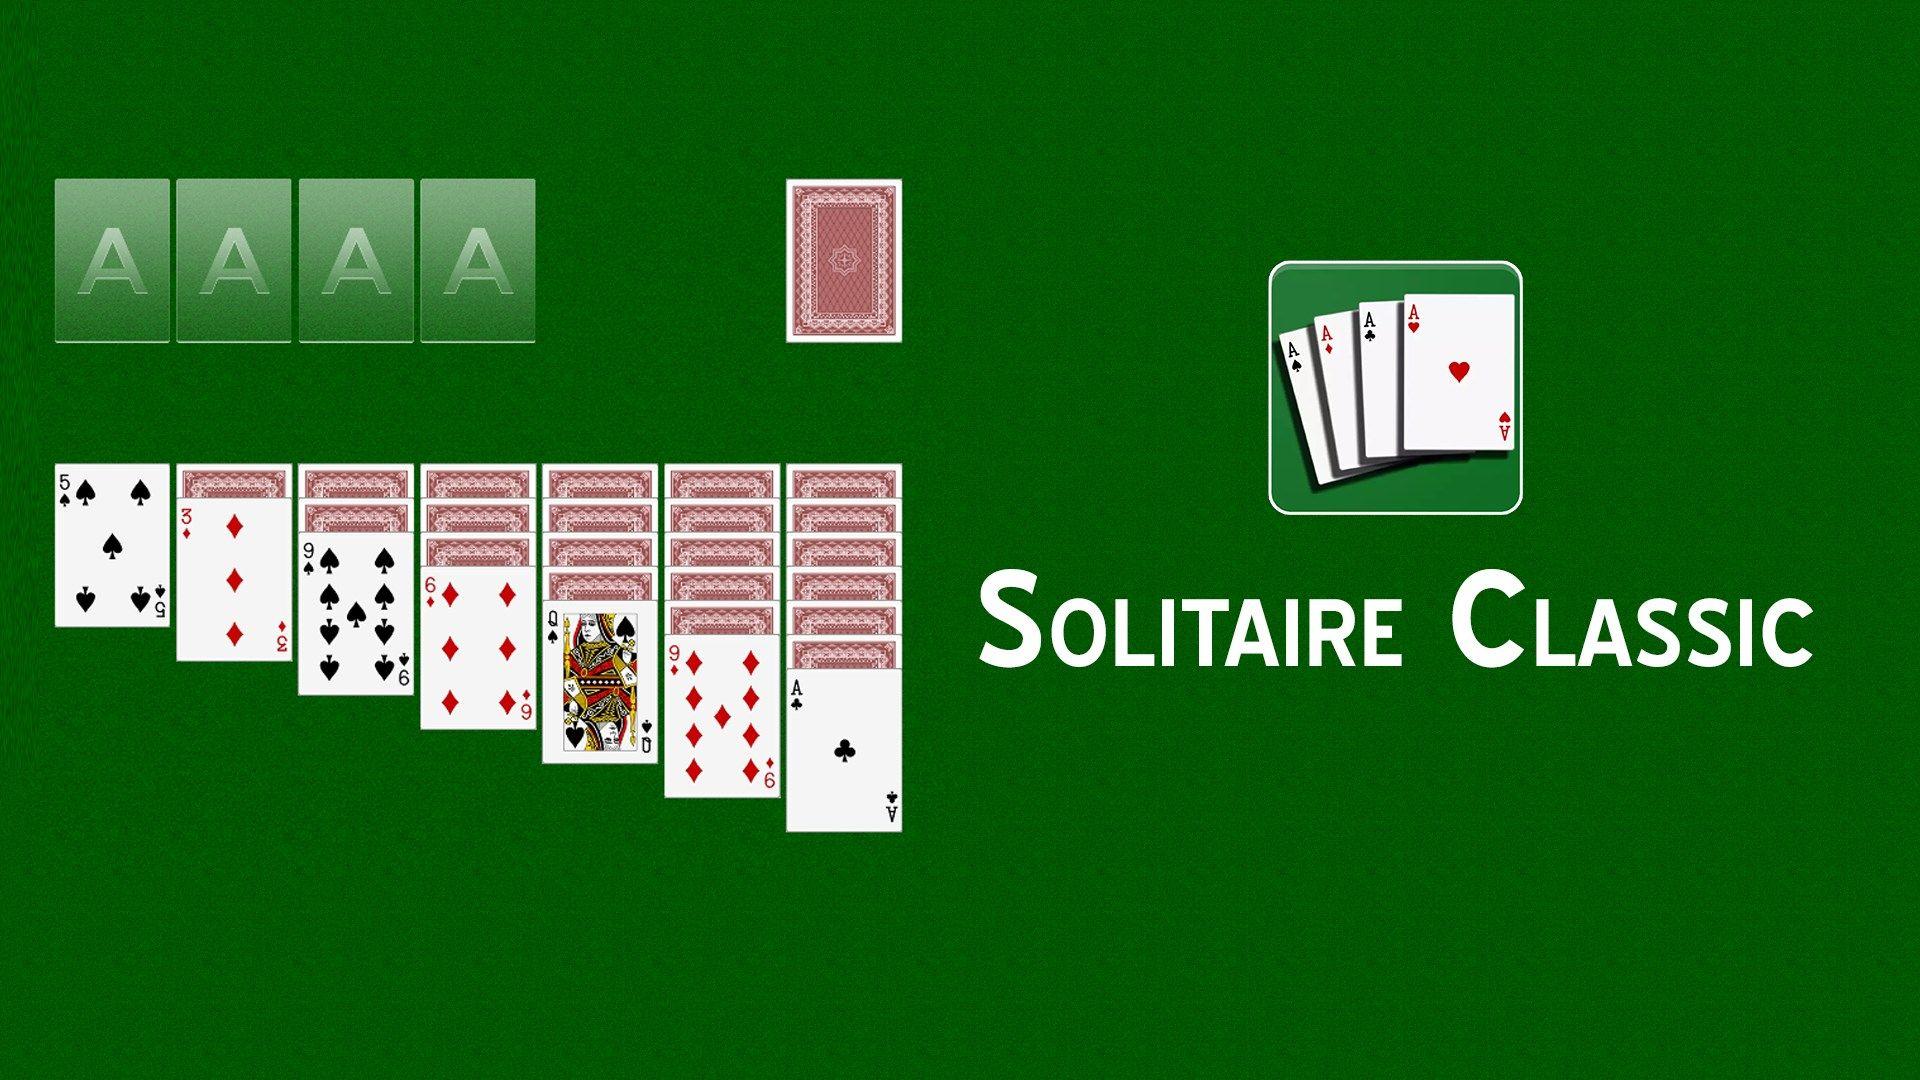 microsoft free solitaire download